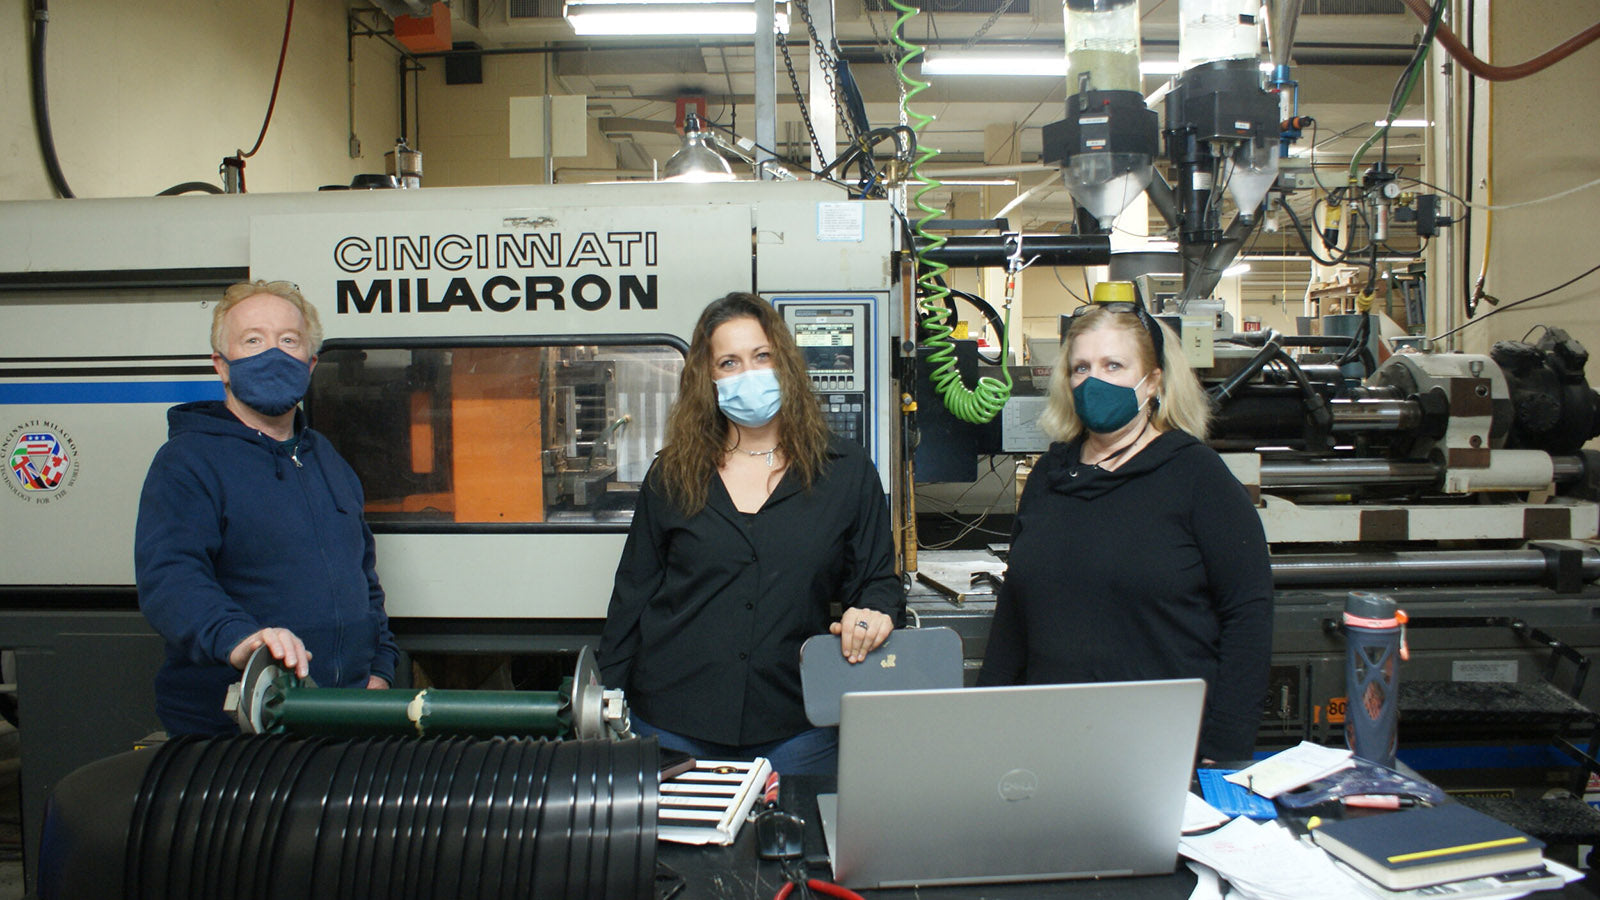 From Left: Dan Young of M-Tech Design with Alethea Schaeffer & Cynthia Marchetti of Usheco, Inc. at the machine used to manufacture SeadPods